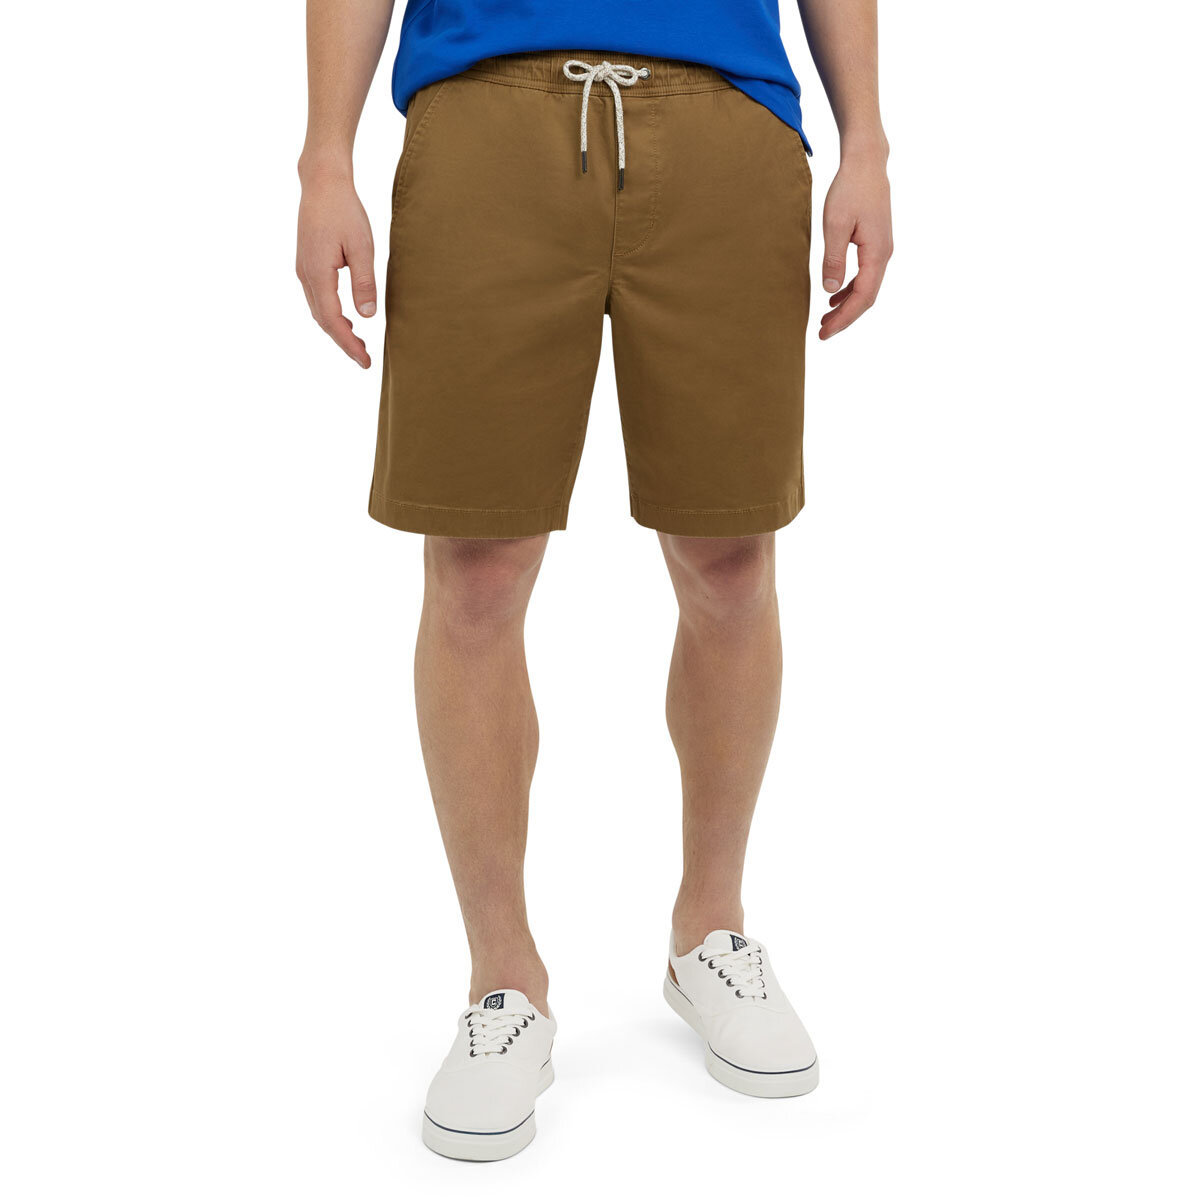 Chaps Men’s Reese Flex Pull-On Short in 4 Toffee